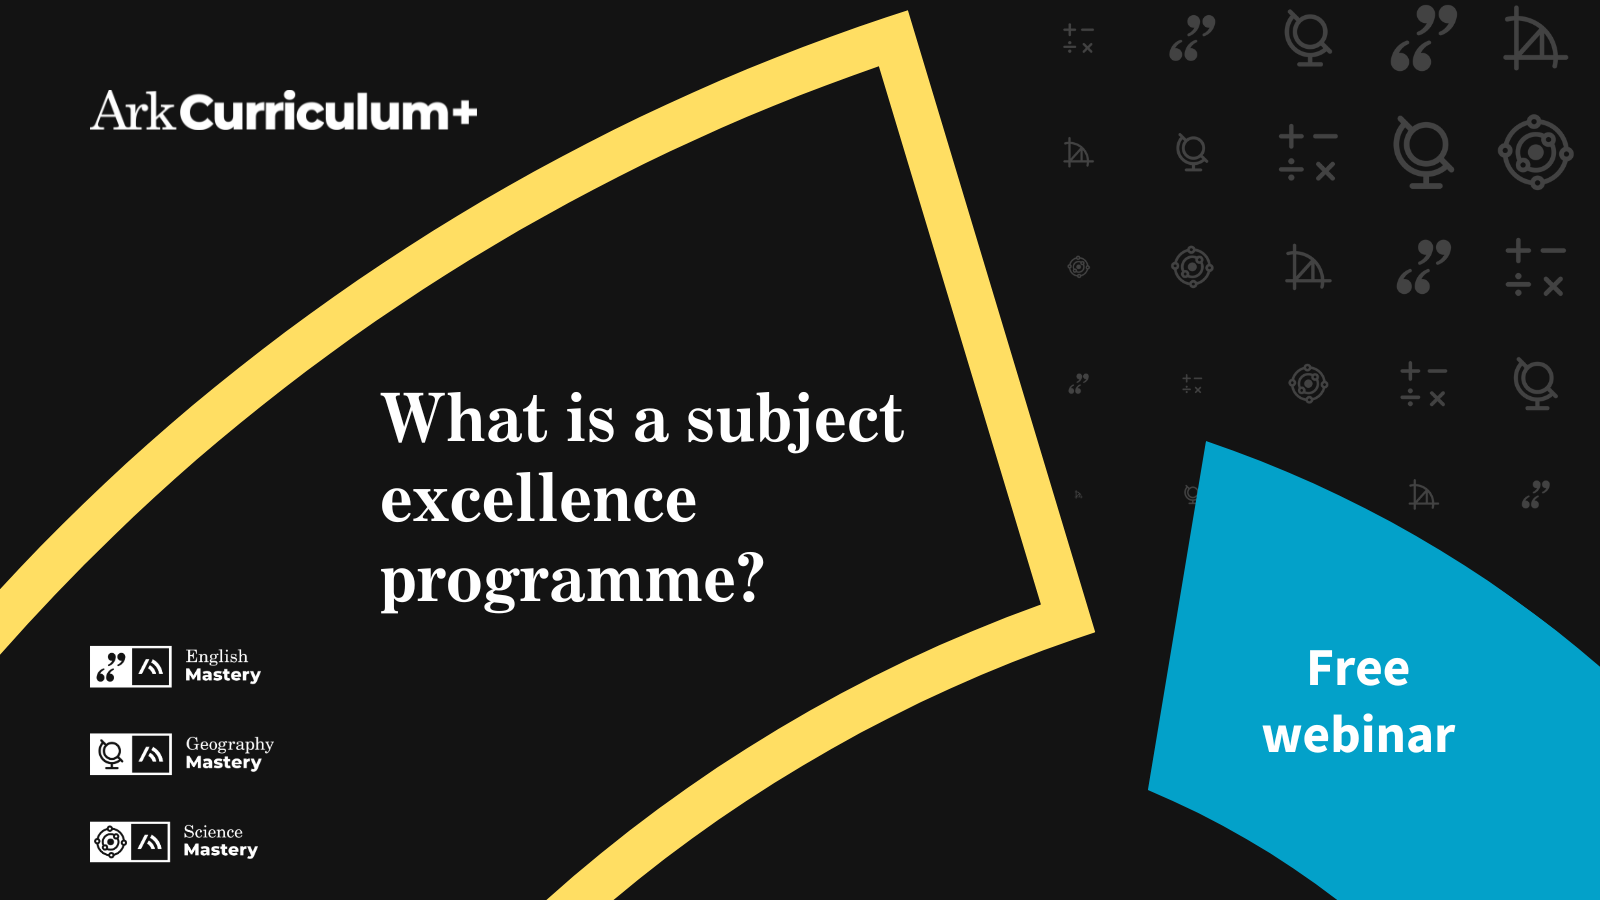 What is a subject excellence programme?